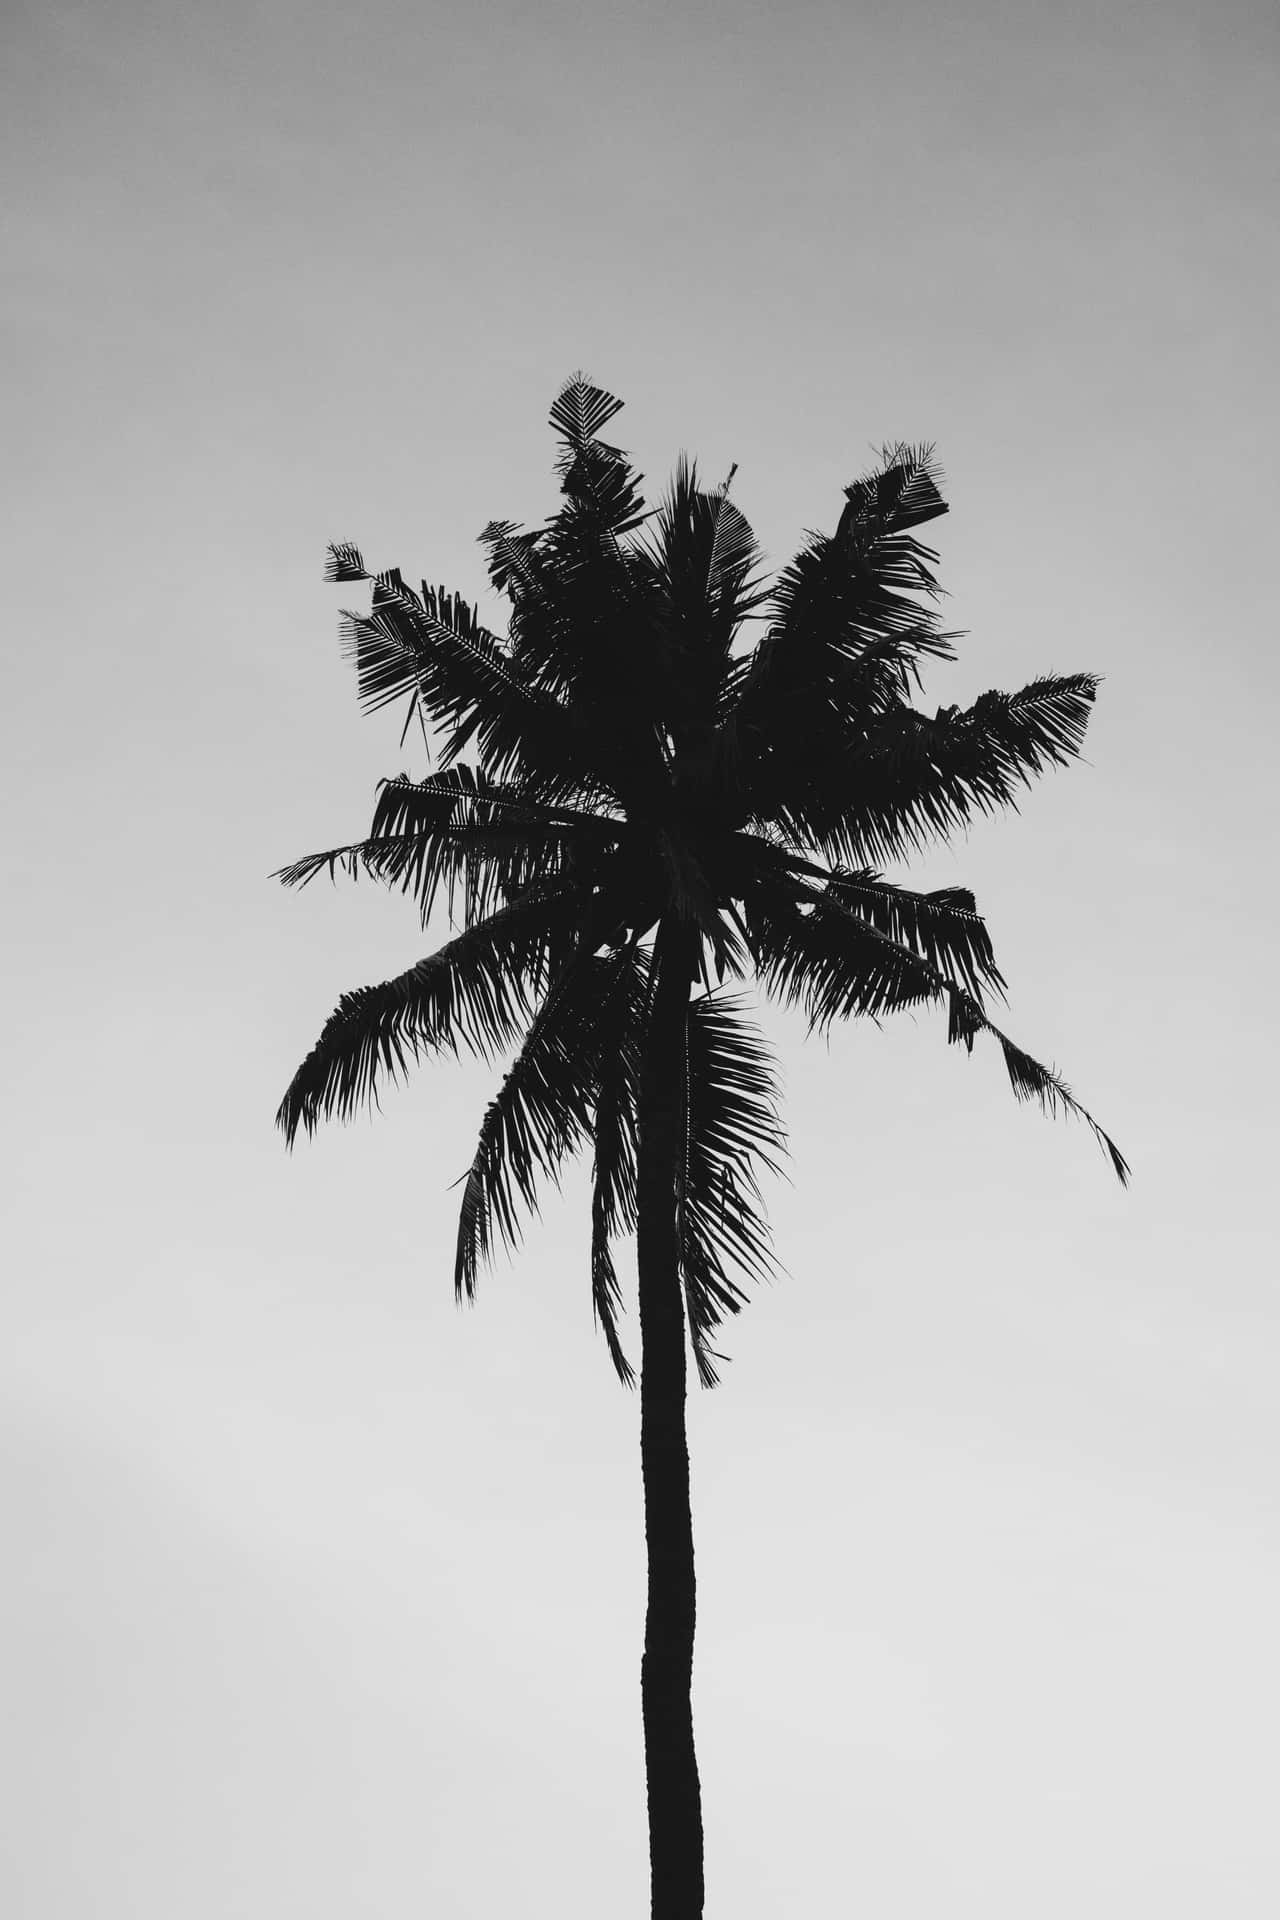 A Black And White Photo Of A Palm Tree